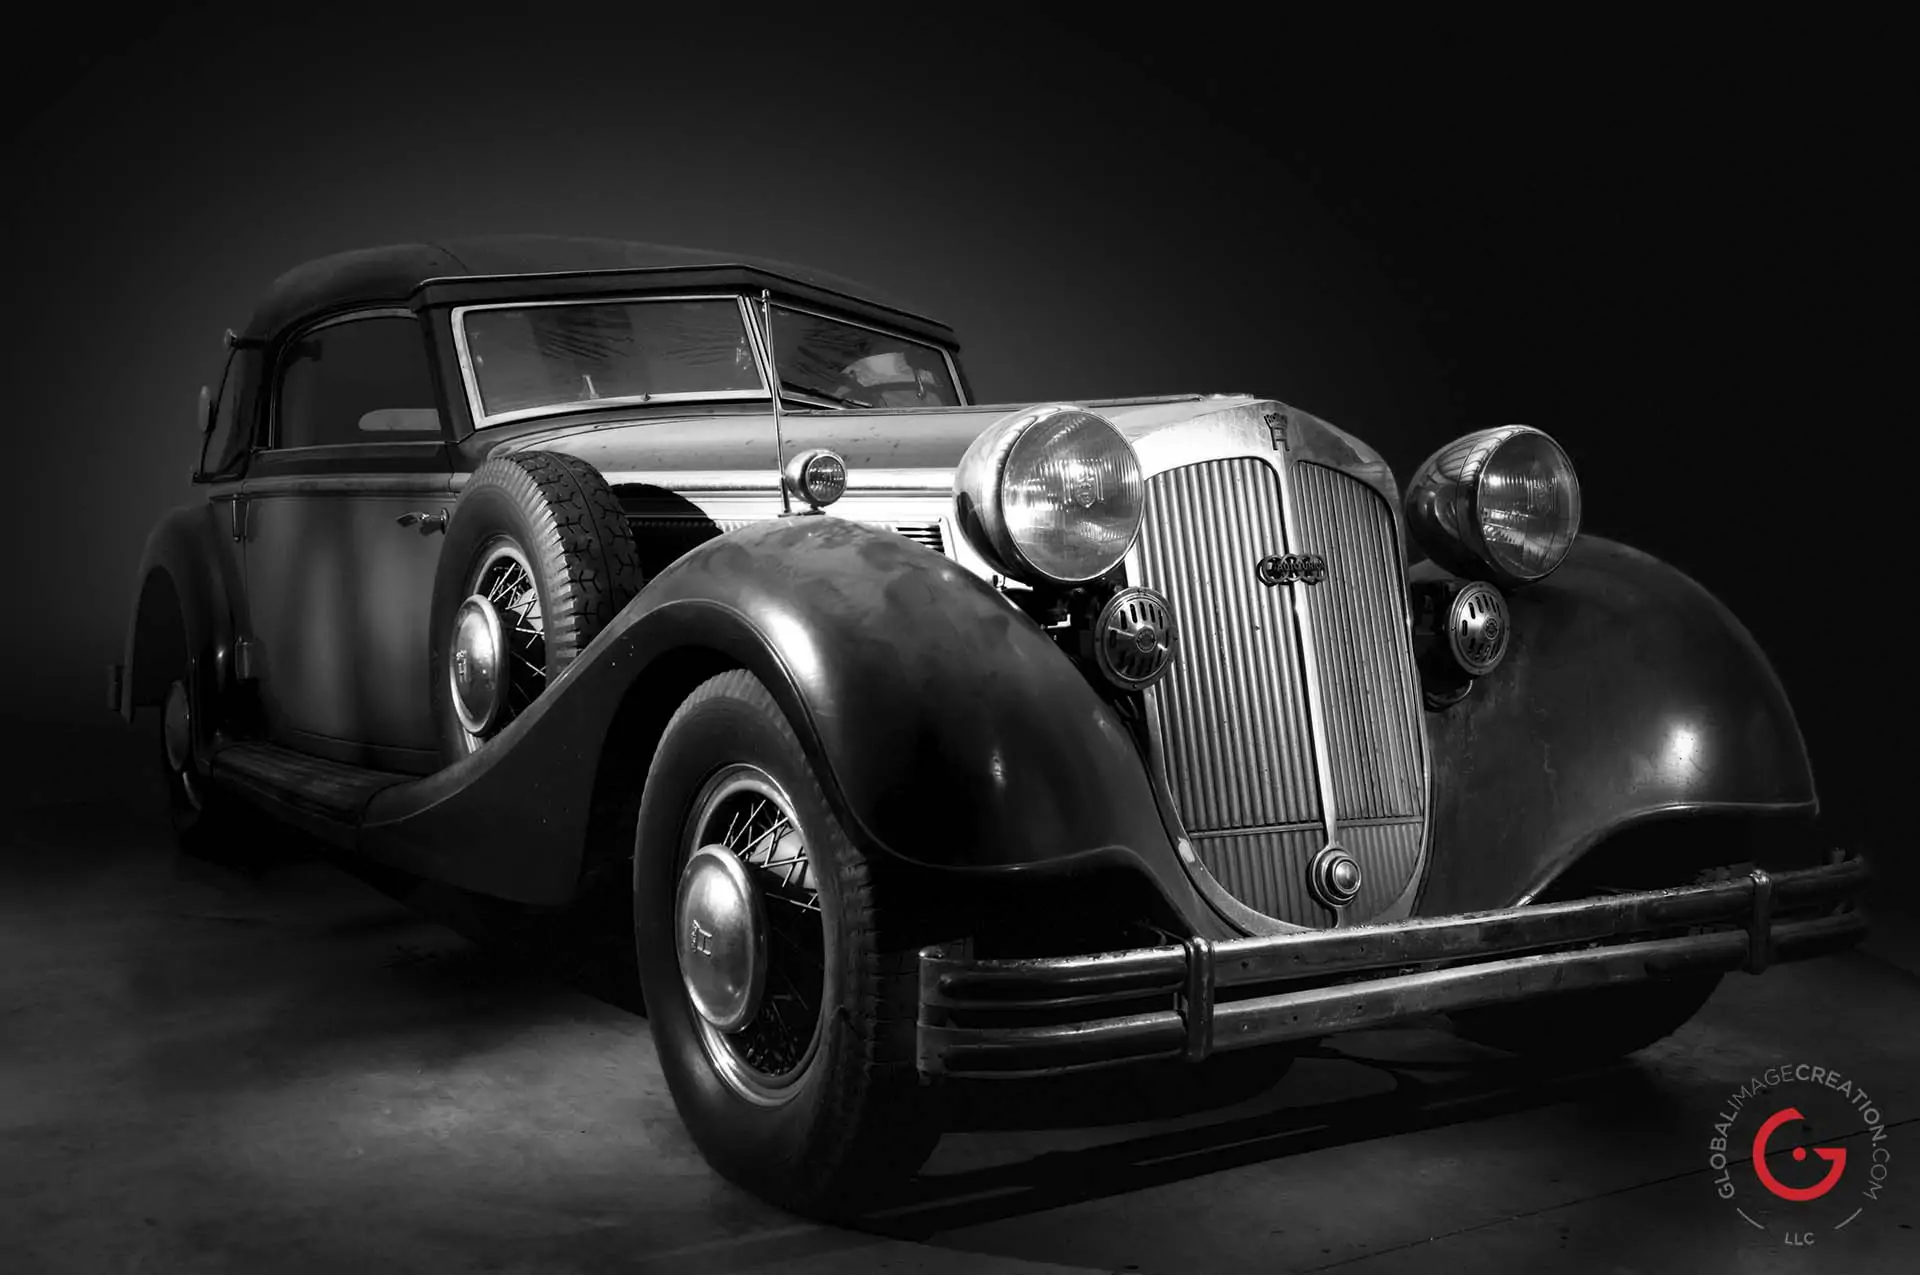 Front 3/4 View - Horch Barn Find, Branson Classic Car Auction - Professional Car Photographer, Automotive Photography